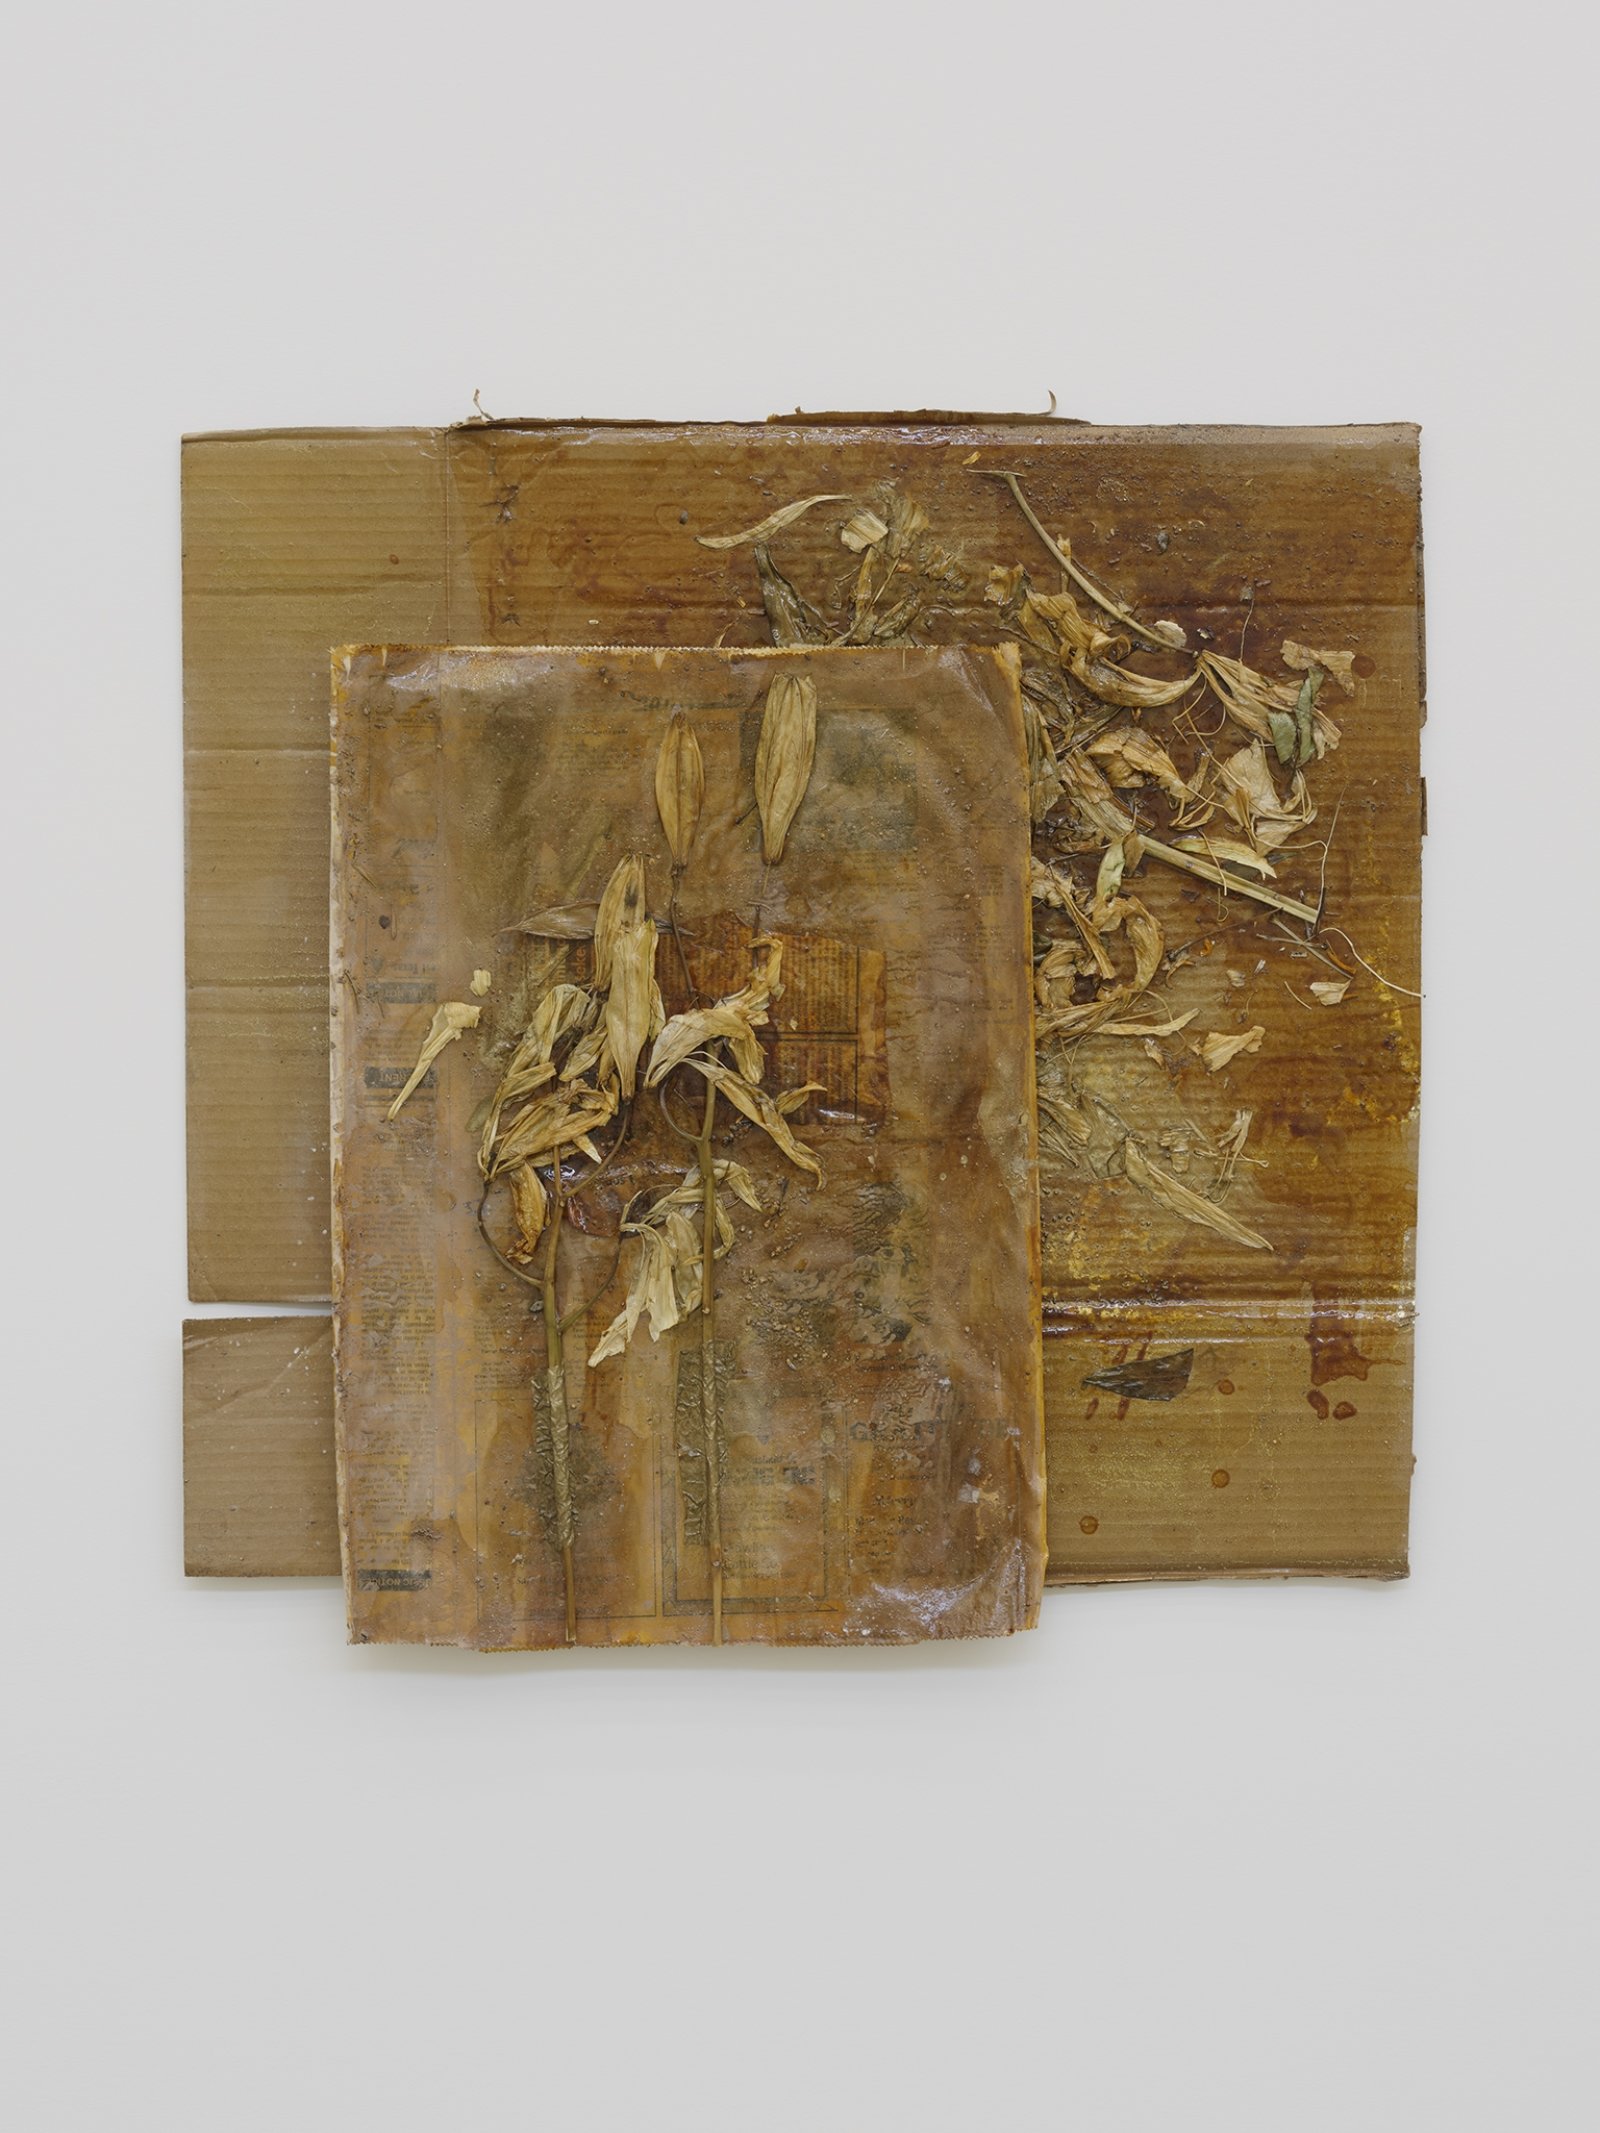 Rochelle Goldberg, Dirty Wall X, 2019, cardboard, newsprint, tissue paper, lilies, shellac, gold pigment, dirt from the river, 28 x 28 in. (71 x 71 cm)